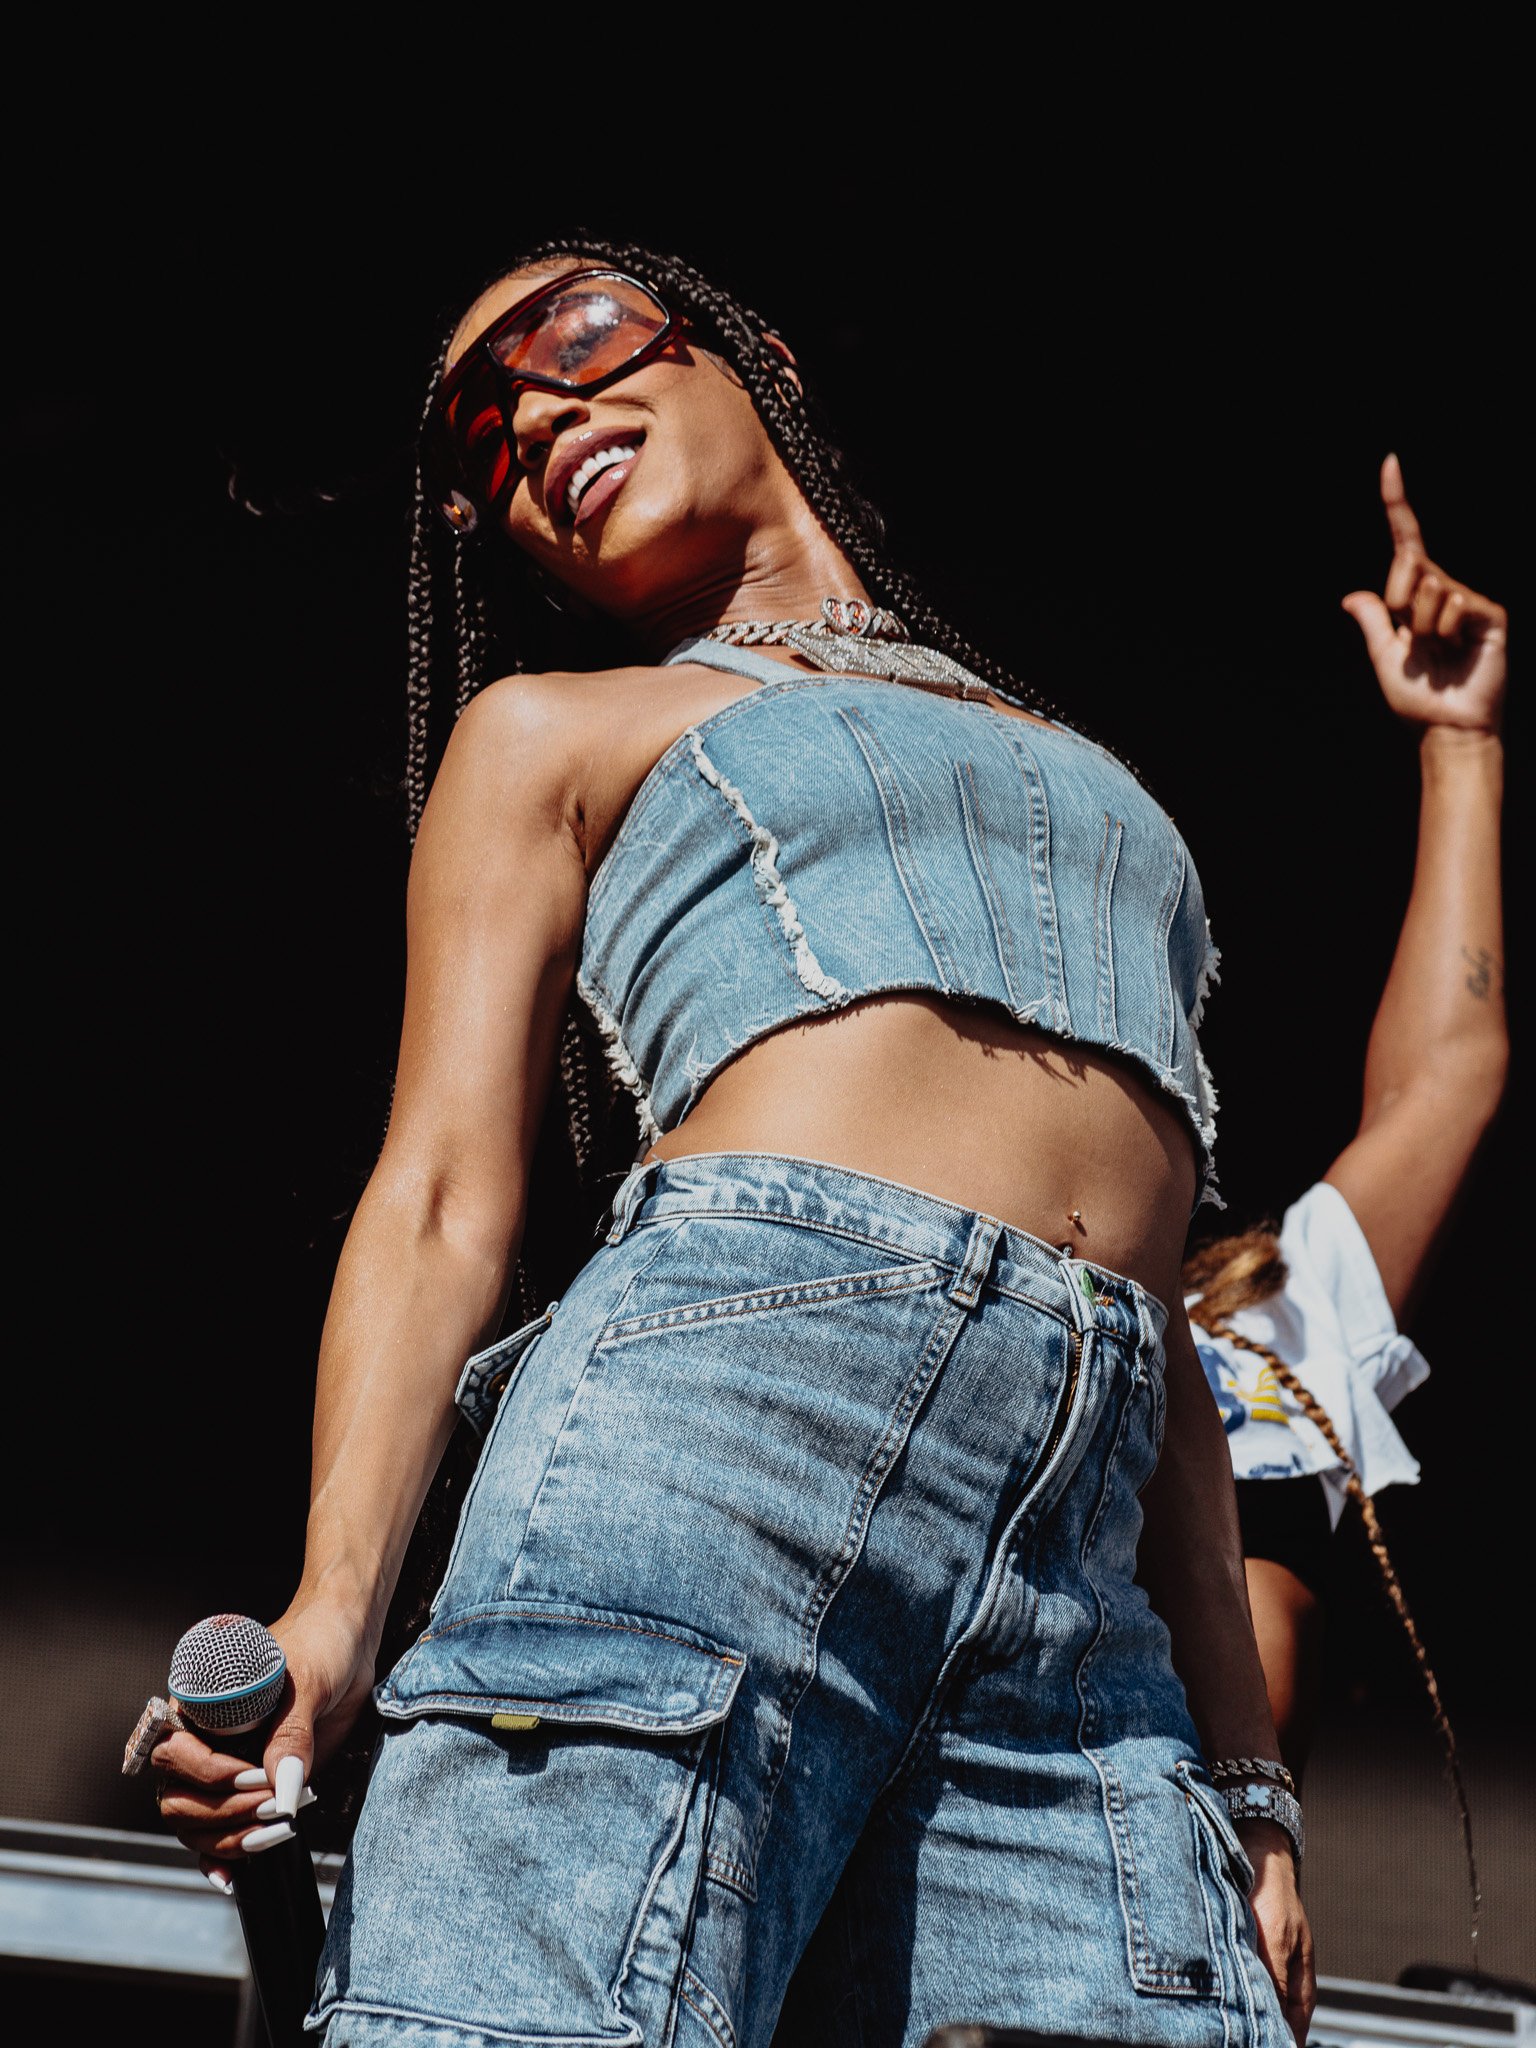  “WHOLE LOTTA MONEY” singer BIA brings her energy to the Miller Lite stage. 